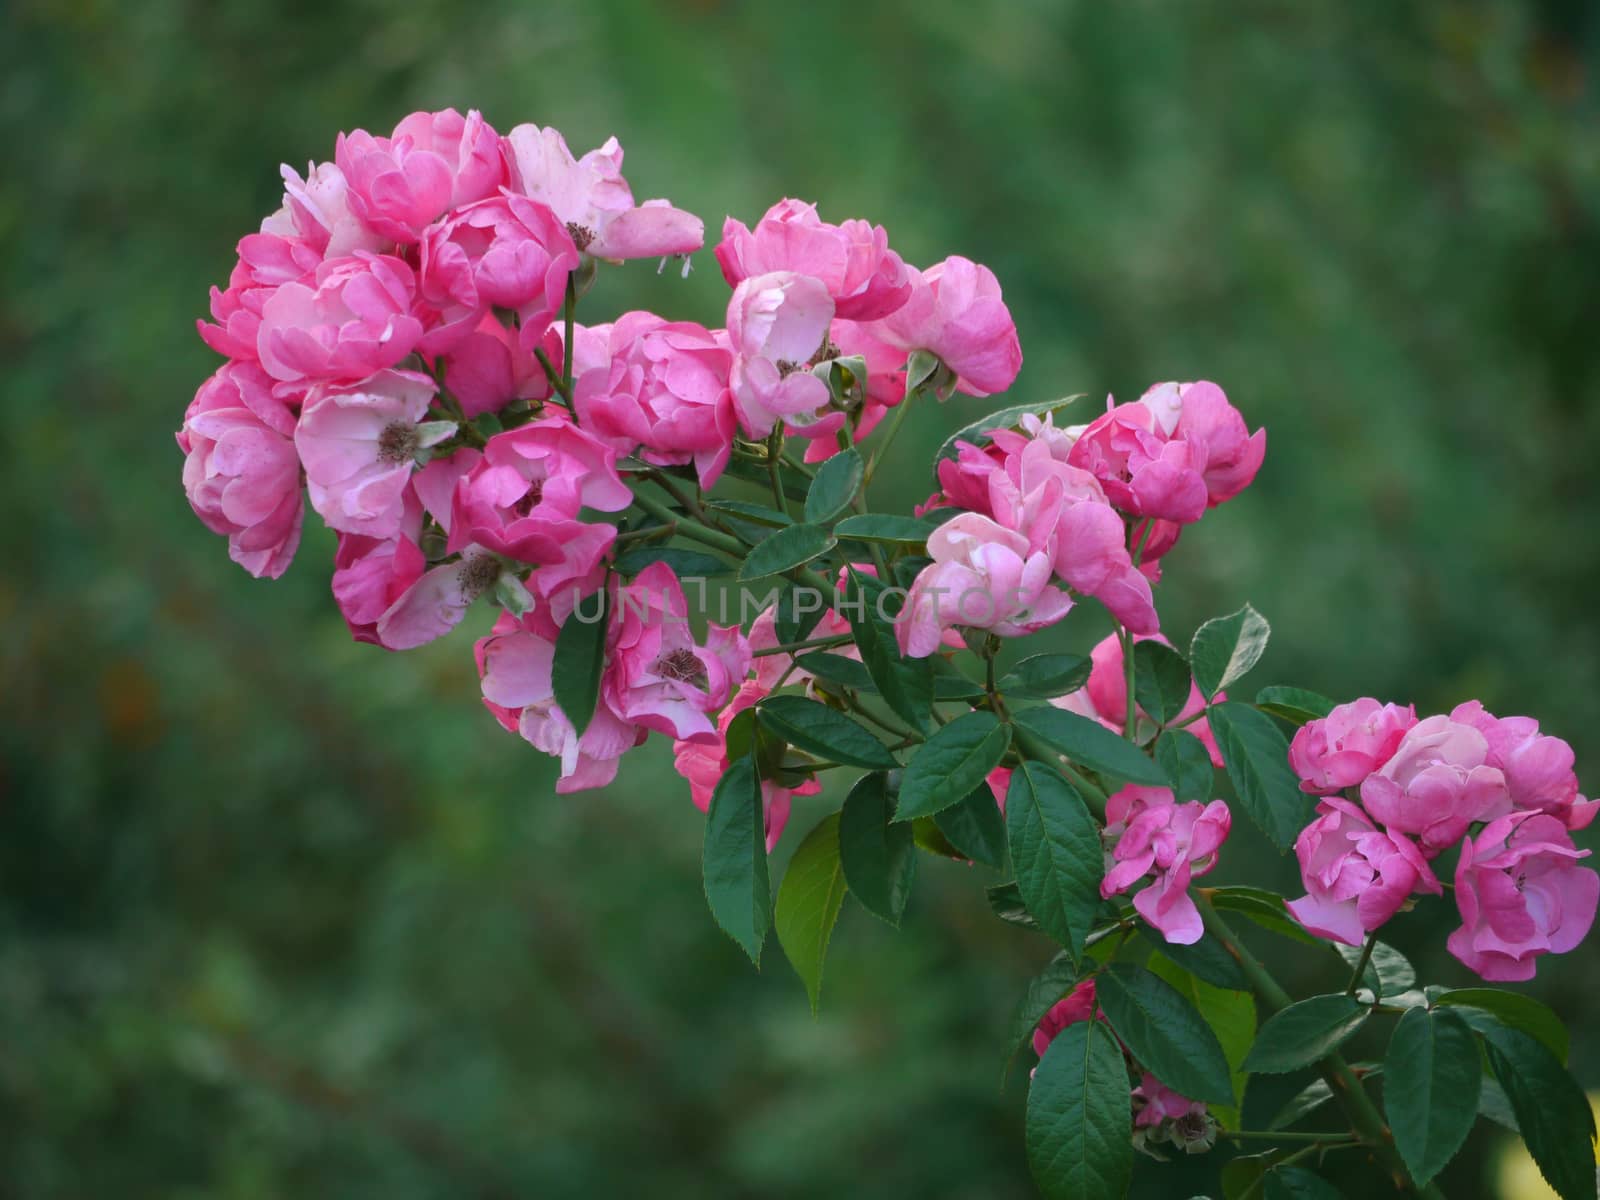 A huge branch with fragrant puffy pale pink roses and green leaves by Adamchuk